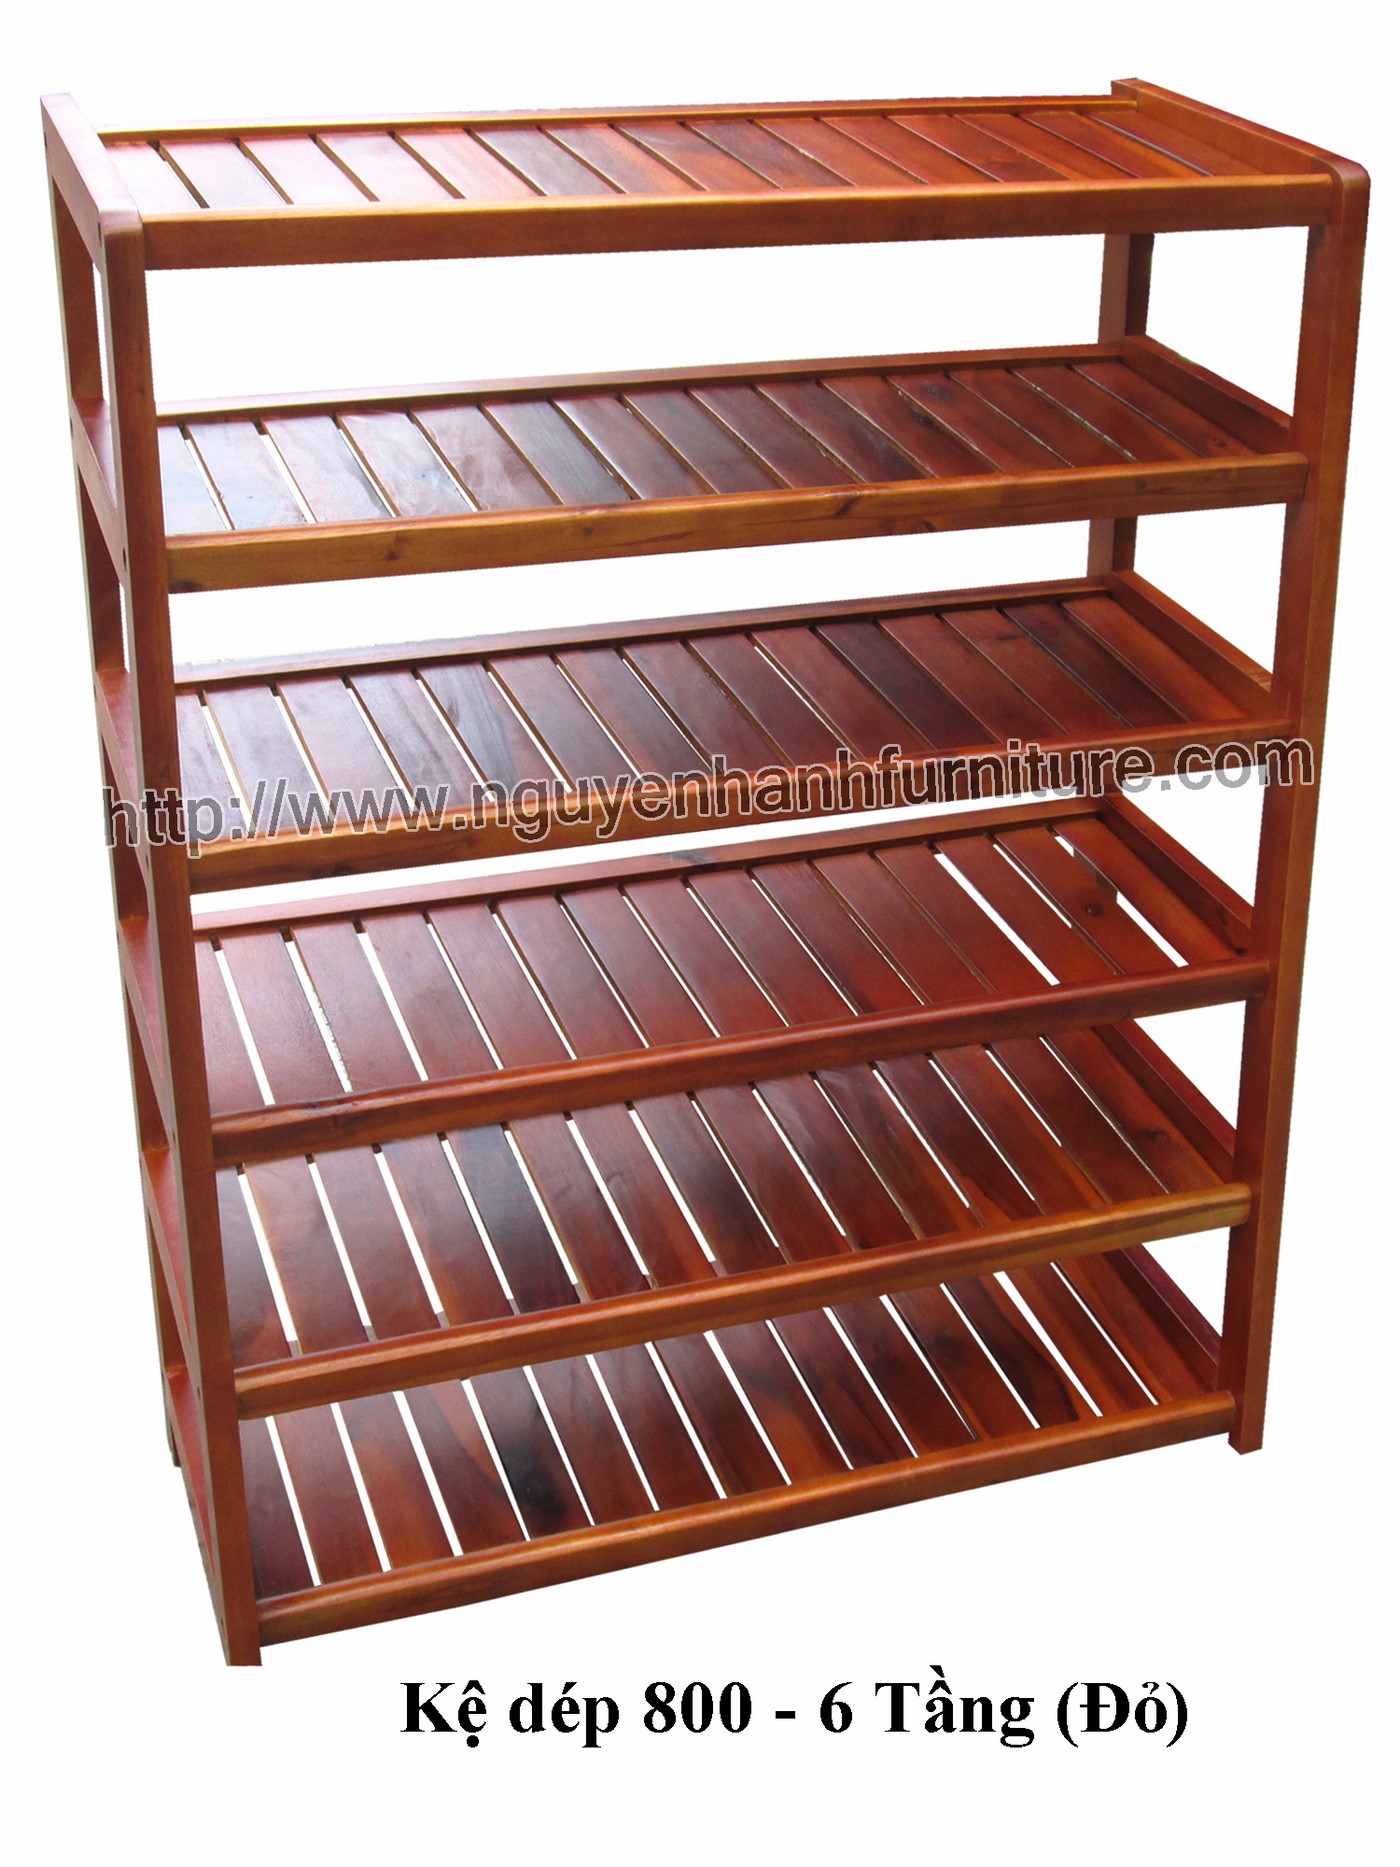 Name product: Shoeshelf 6 Floors 80 with sparse blades (Red) - Dimensions: 80 x 30 x 98 (H) - Description: Wood natural rubber